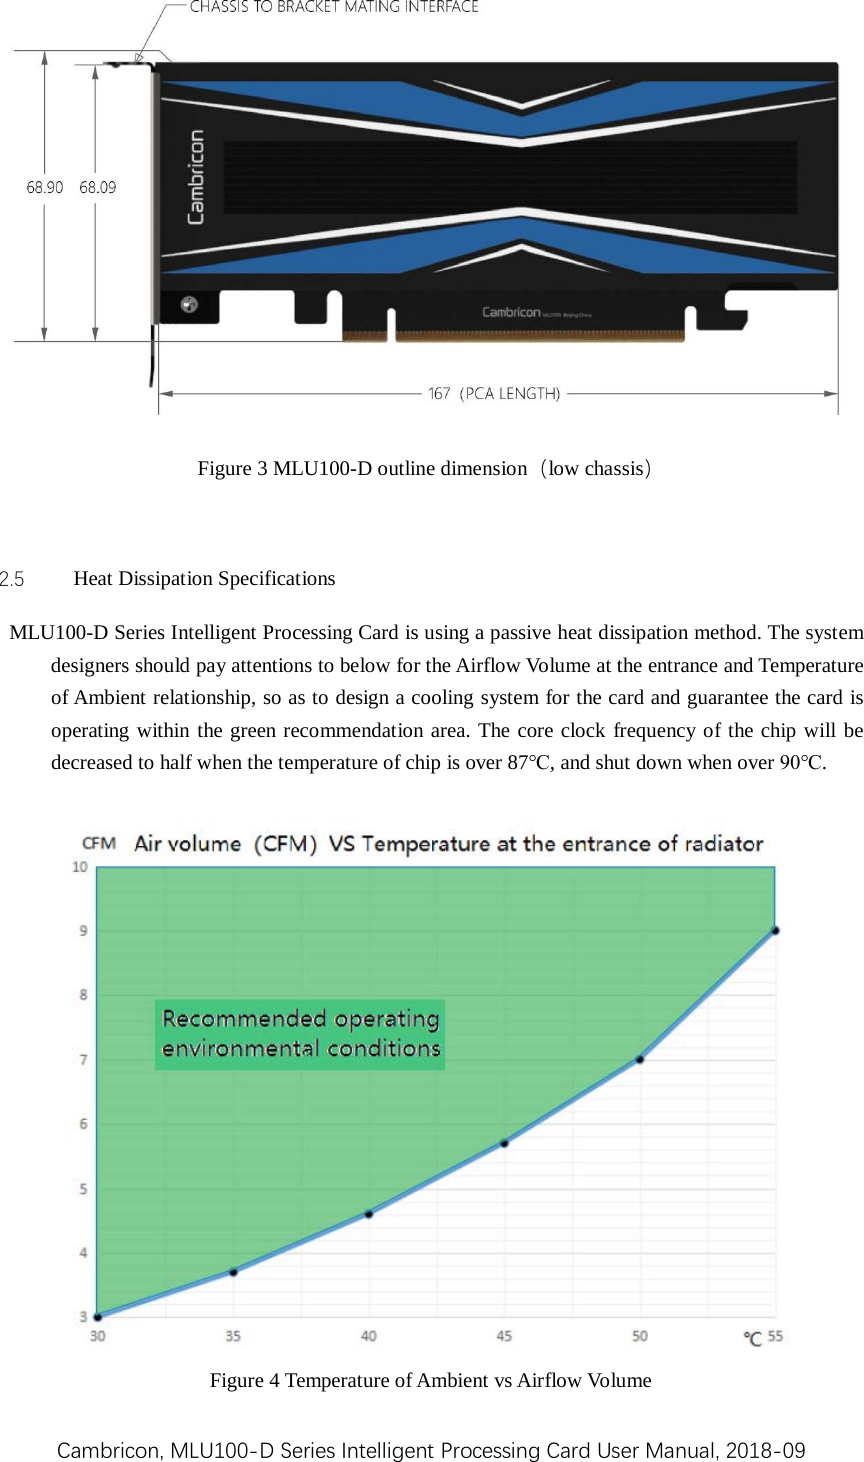 Cambricon, MLU100-D Series Intelligent Processing Card User Manual, 2018-09  Figure 3 MLU100-D outline dimension（low chassis）  2.5 Heat Dissipation Specifications MLU100-D Series Intelligent Processing Card is using a passive heat dissipation method. The system designers should pay attentions to below for the Airflow Volume at the entrance and Temperature of Ambient relationship, so as to design a cooling system for the card and guarantee the card is operating within the green recommendation area. The core clock frequency of the chip will be decreased to half when the temperature of chip is over 87℃, and shut down when over 90℃.   Figure 4 Temperature of Ambient vs Airflow Volume 